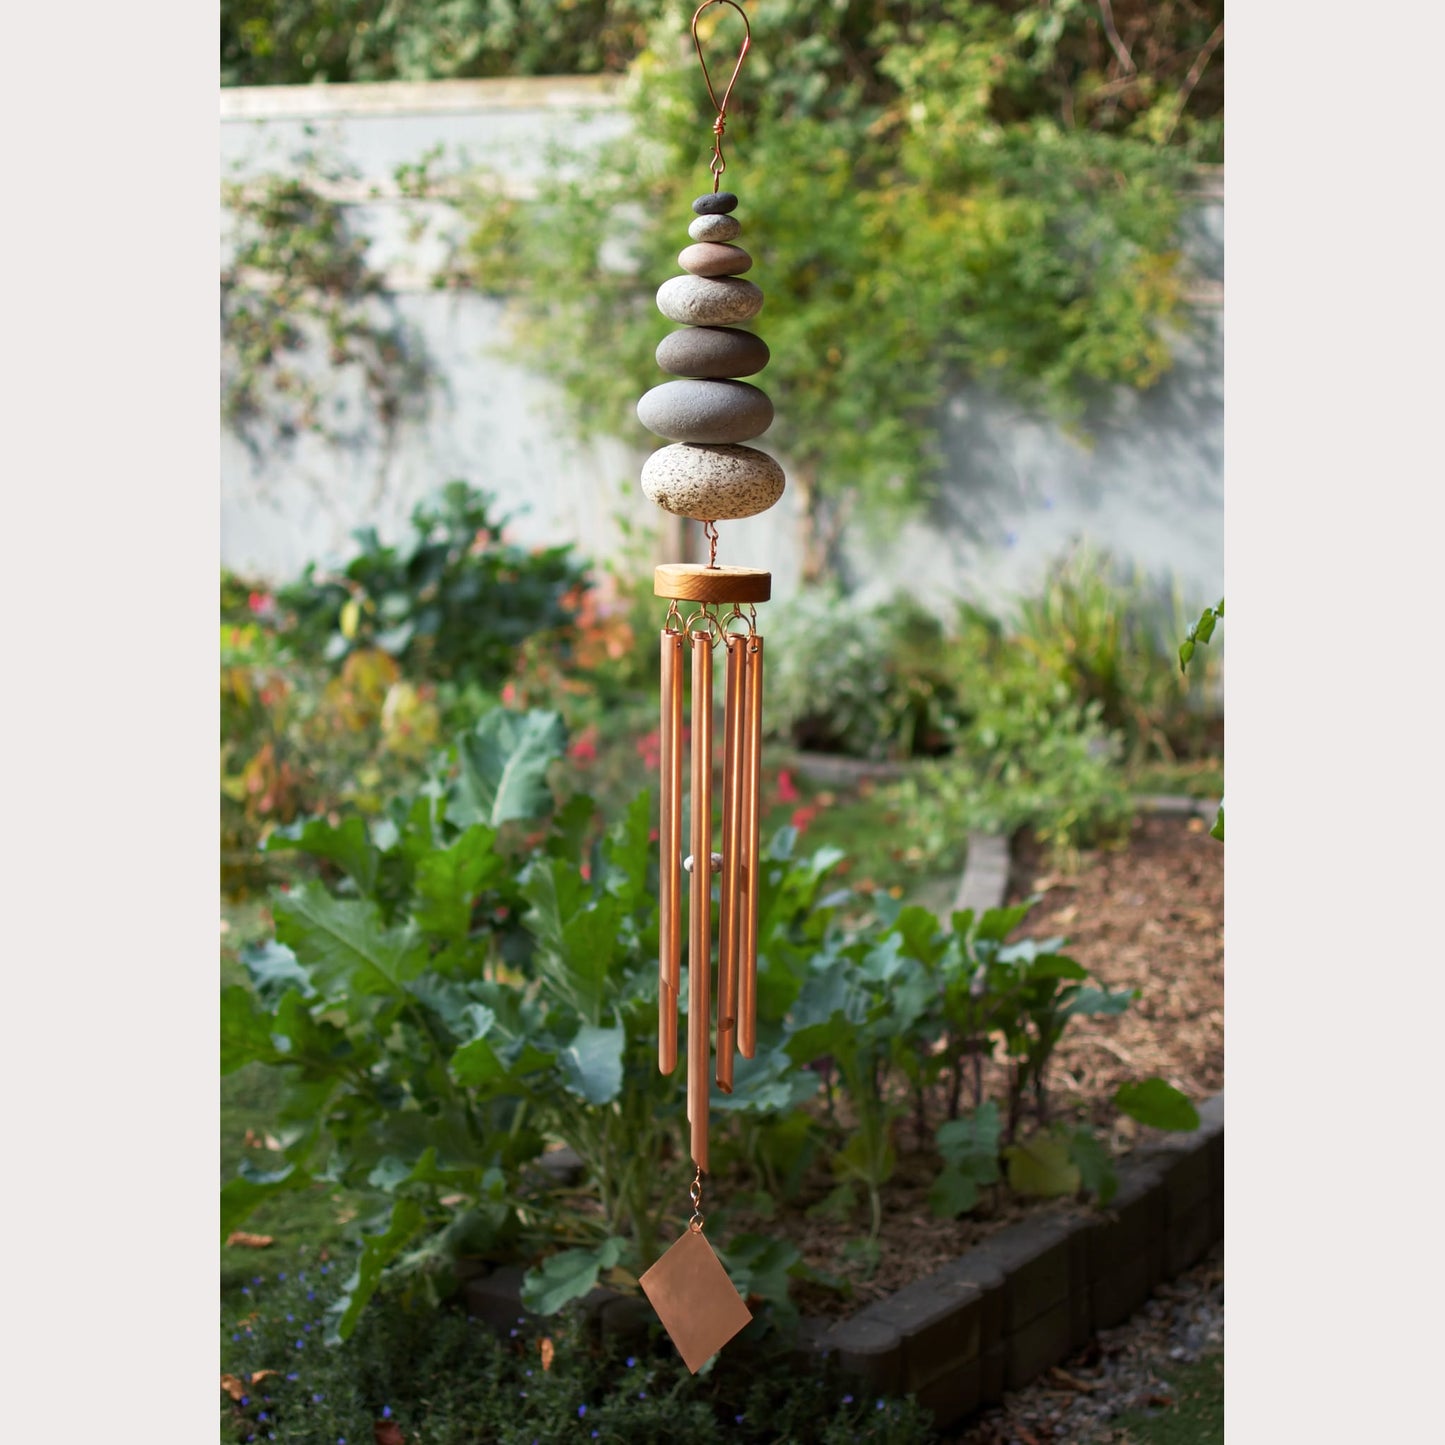 7 beach stone handcrafted copper wind chime.